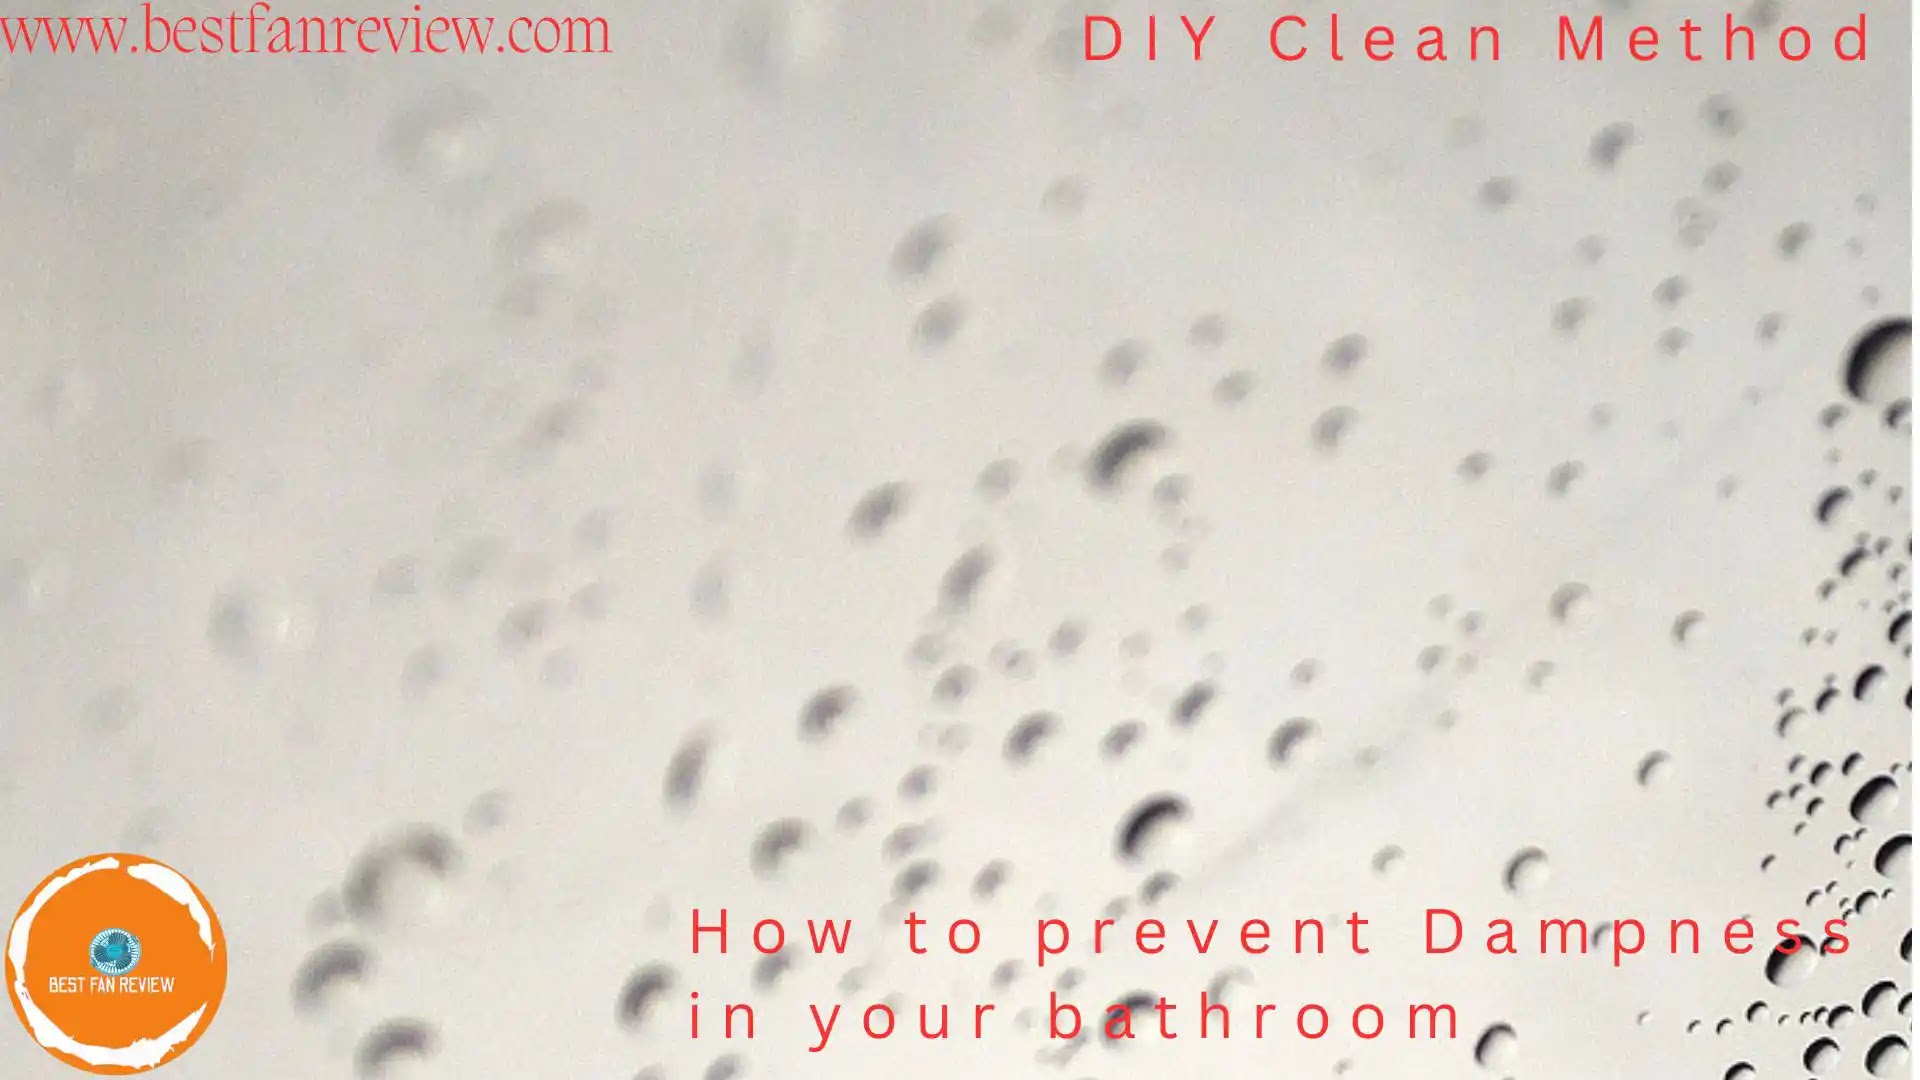 Google Discover, In this article I will explore the DIY genuine way to reduce Dampness in your bathroom without an exhaust Fan. 5 DIY Genuine Way to Reduce Dampness